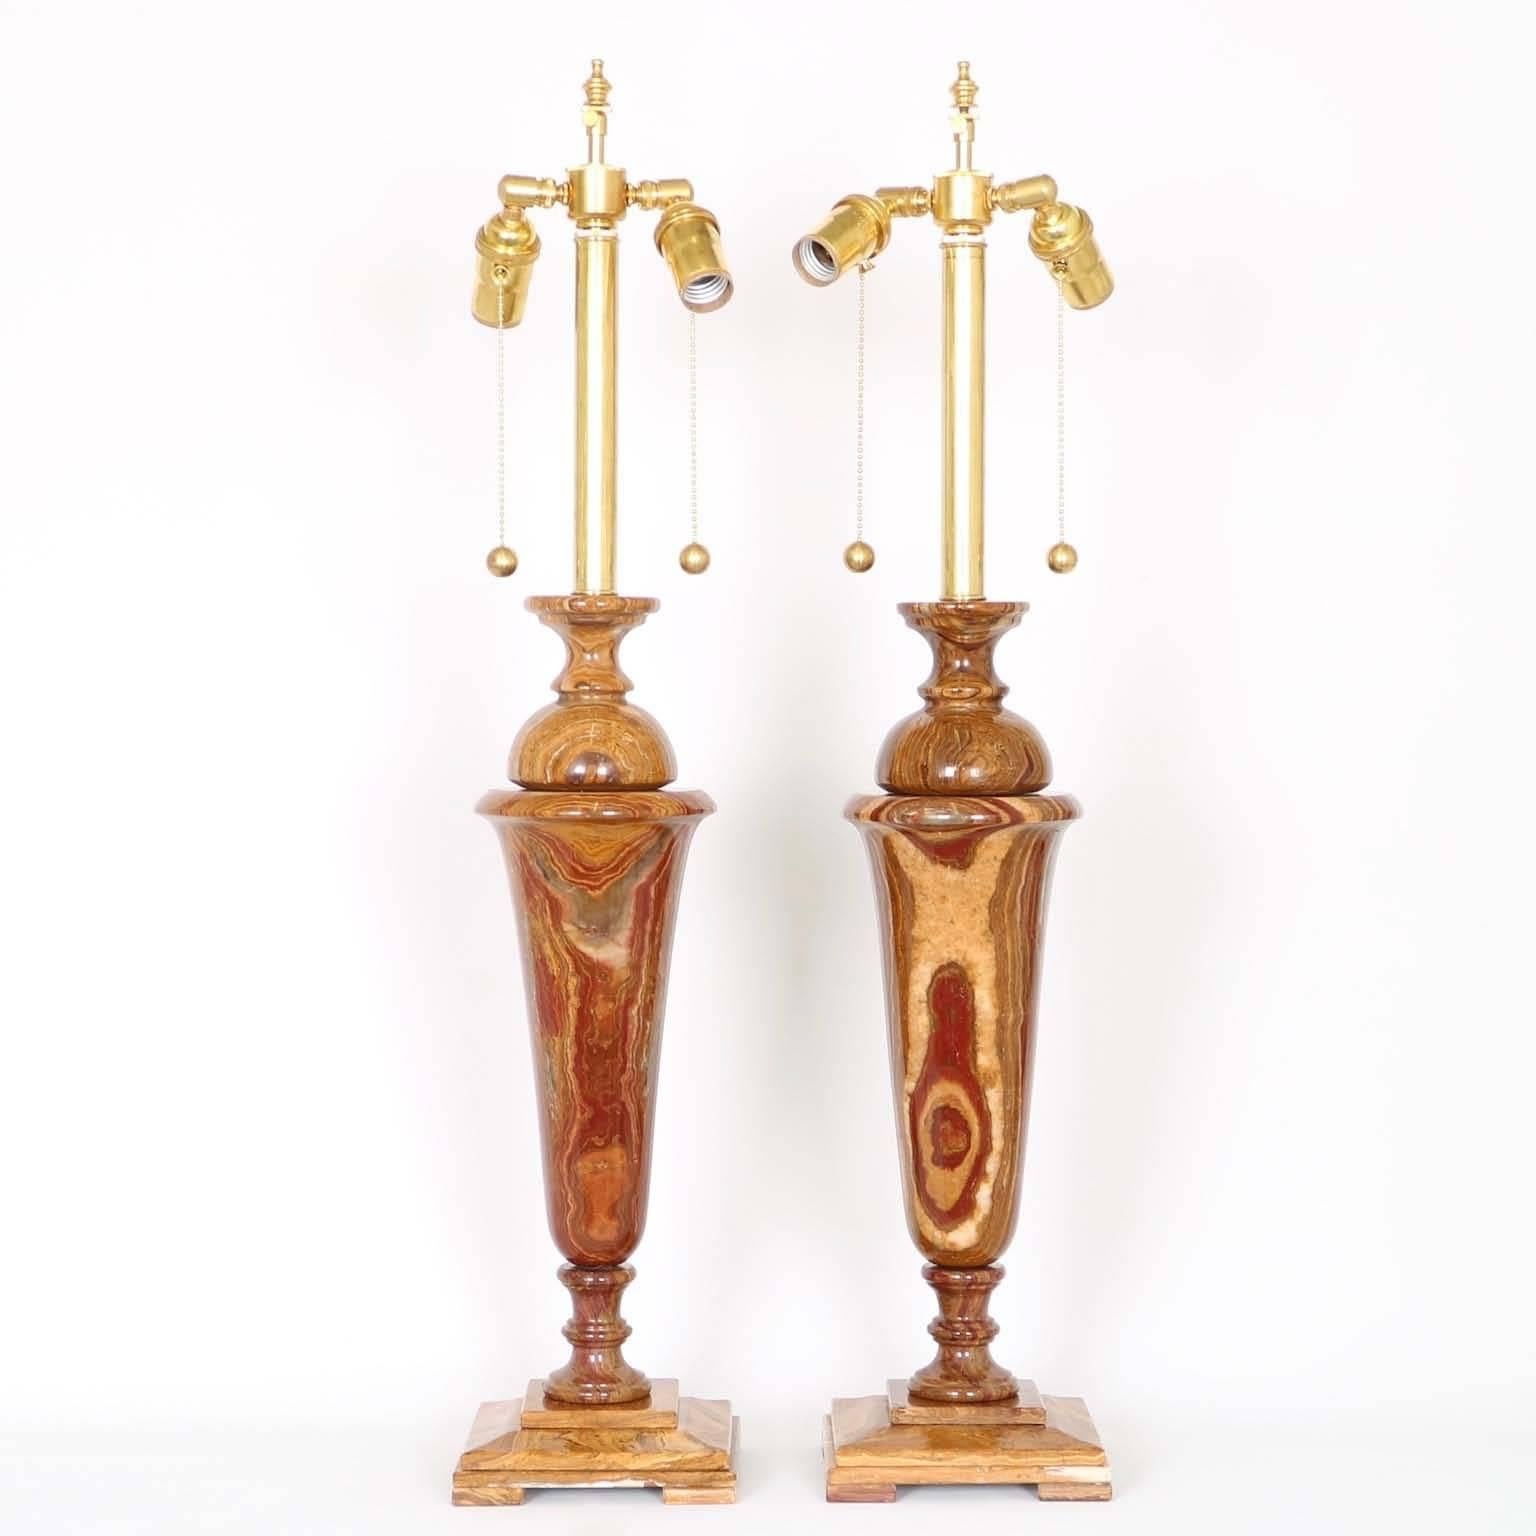 A stunning pair of Italian table lamps in red volcano onyx with a classical design. The noted height is to the finial, height to the top of each onyx body is 20.5 in (52 cm). Fully restored with all new wiring and hardware, including a double socket